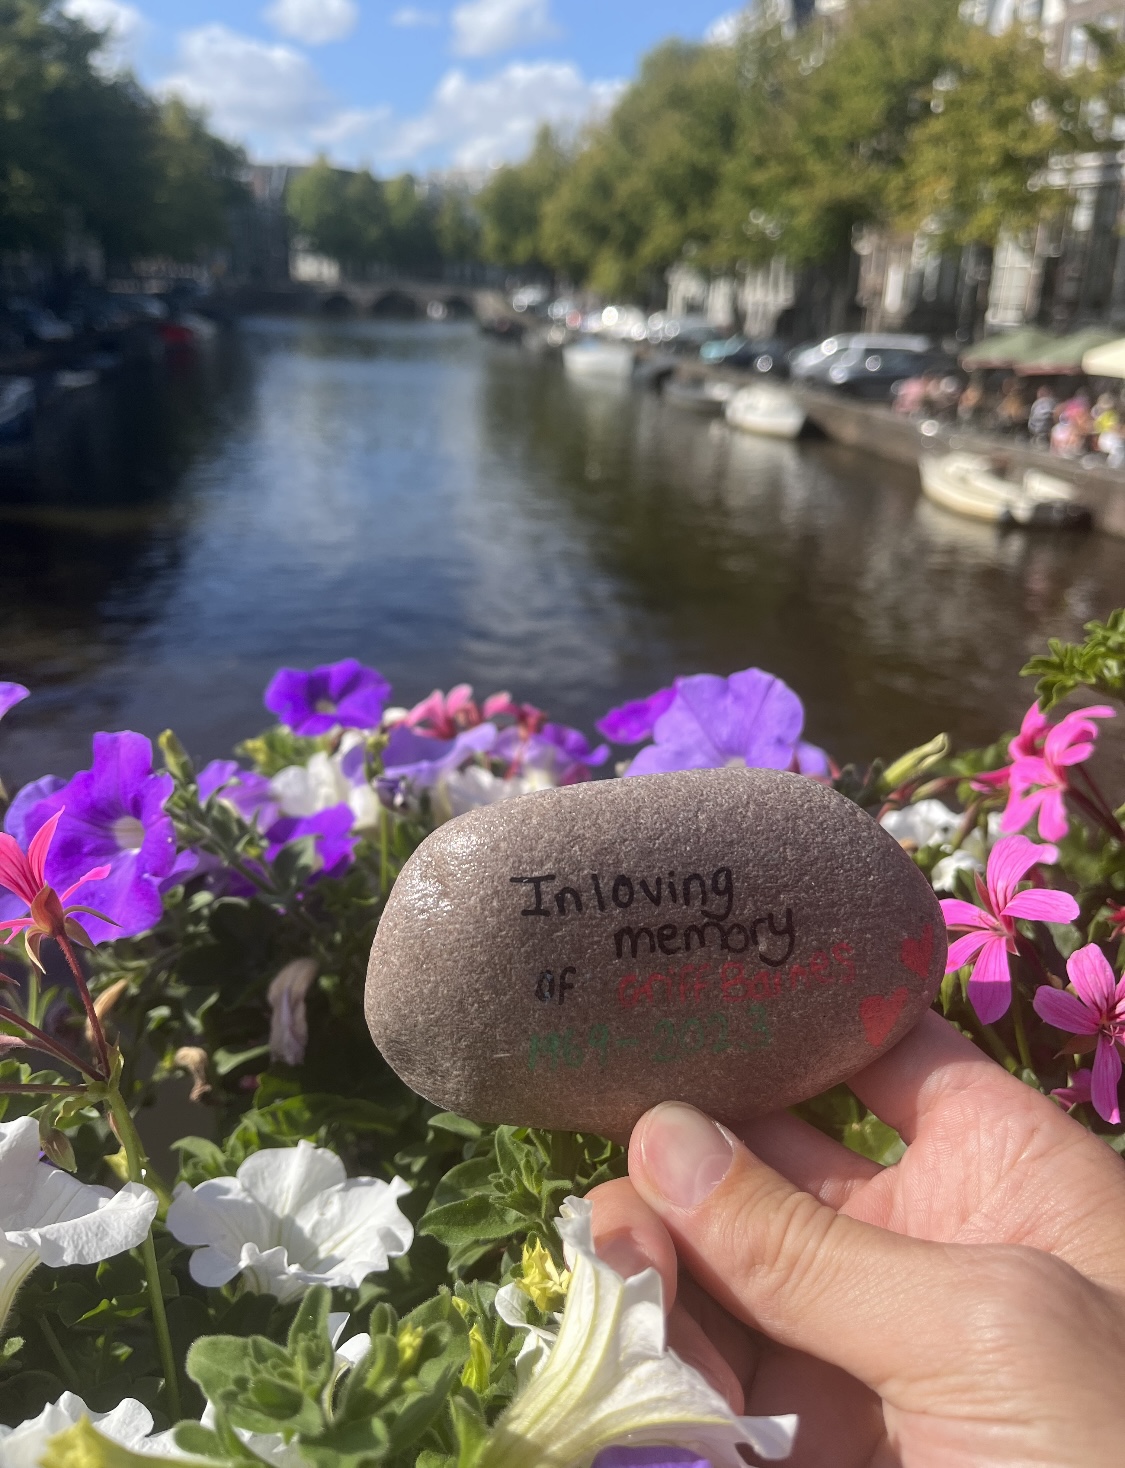 A rock reading the words 'In loving memory of Griff Barnes' held in front of some flowers over a canal in Amsterdam 